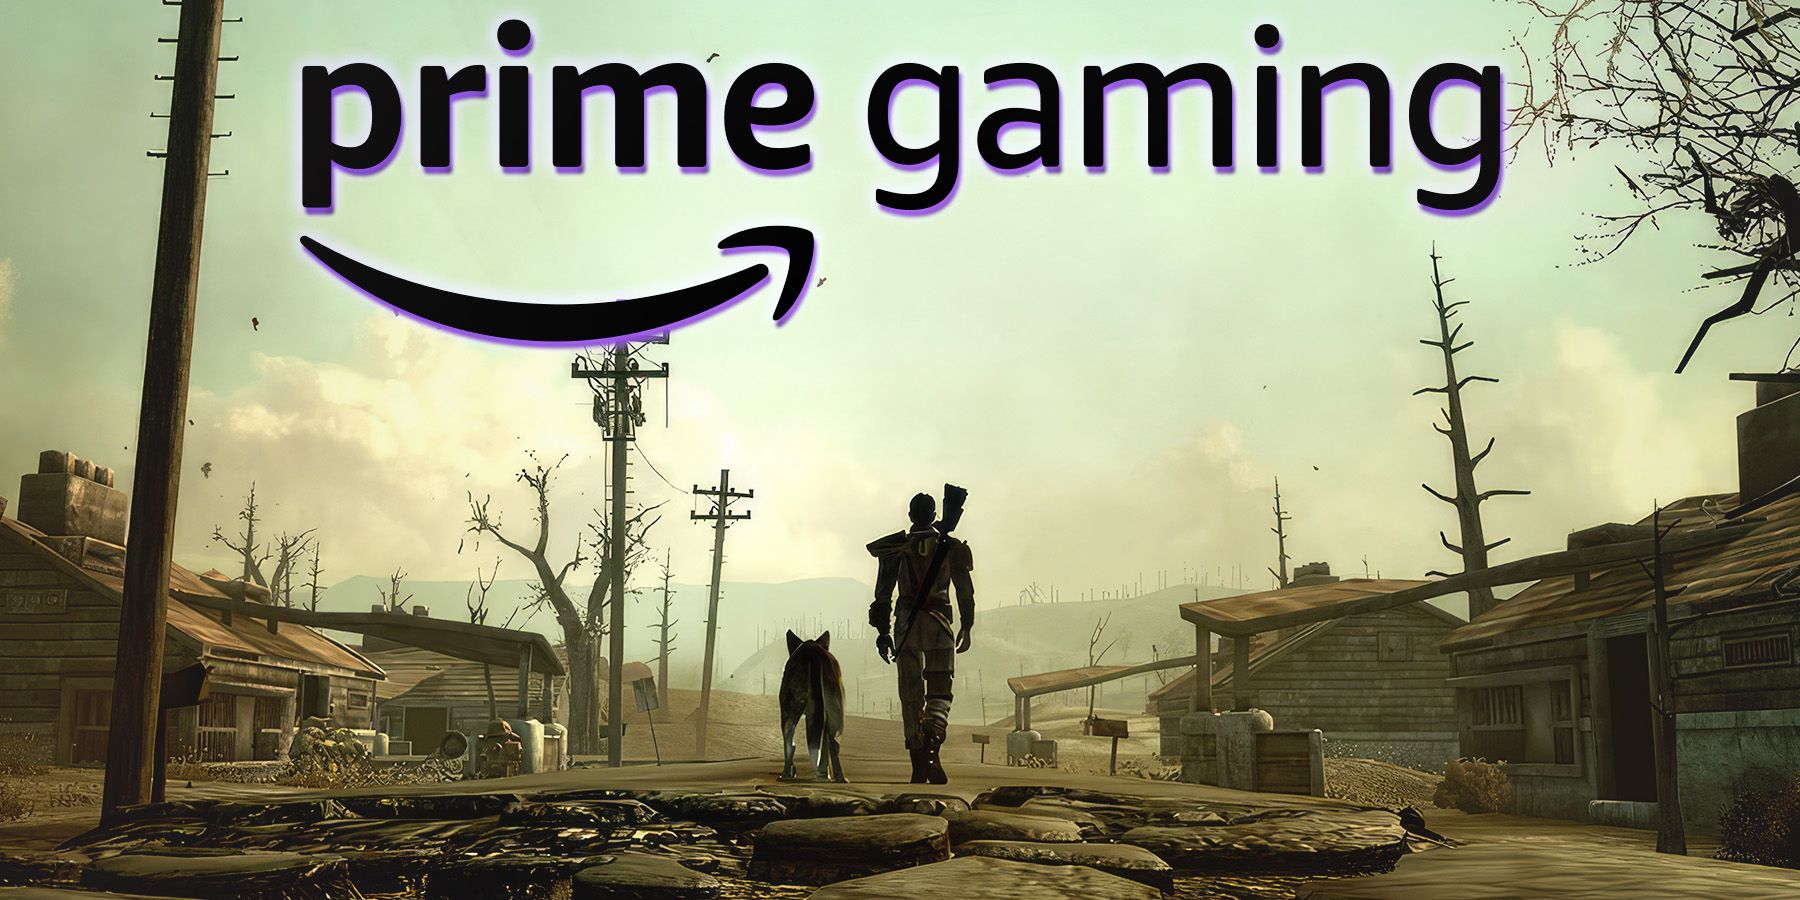 Fallout 3 Dogmeat with The Lone Wanderer upscaled promo screenshot with Amazon Prime Gaming logo edit